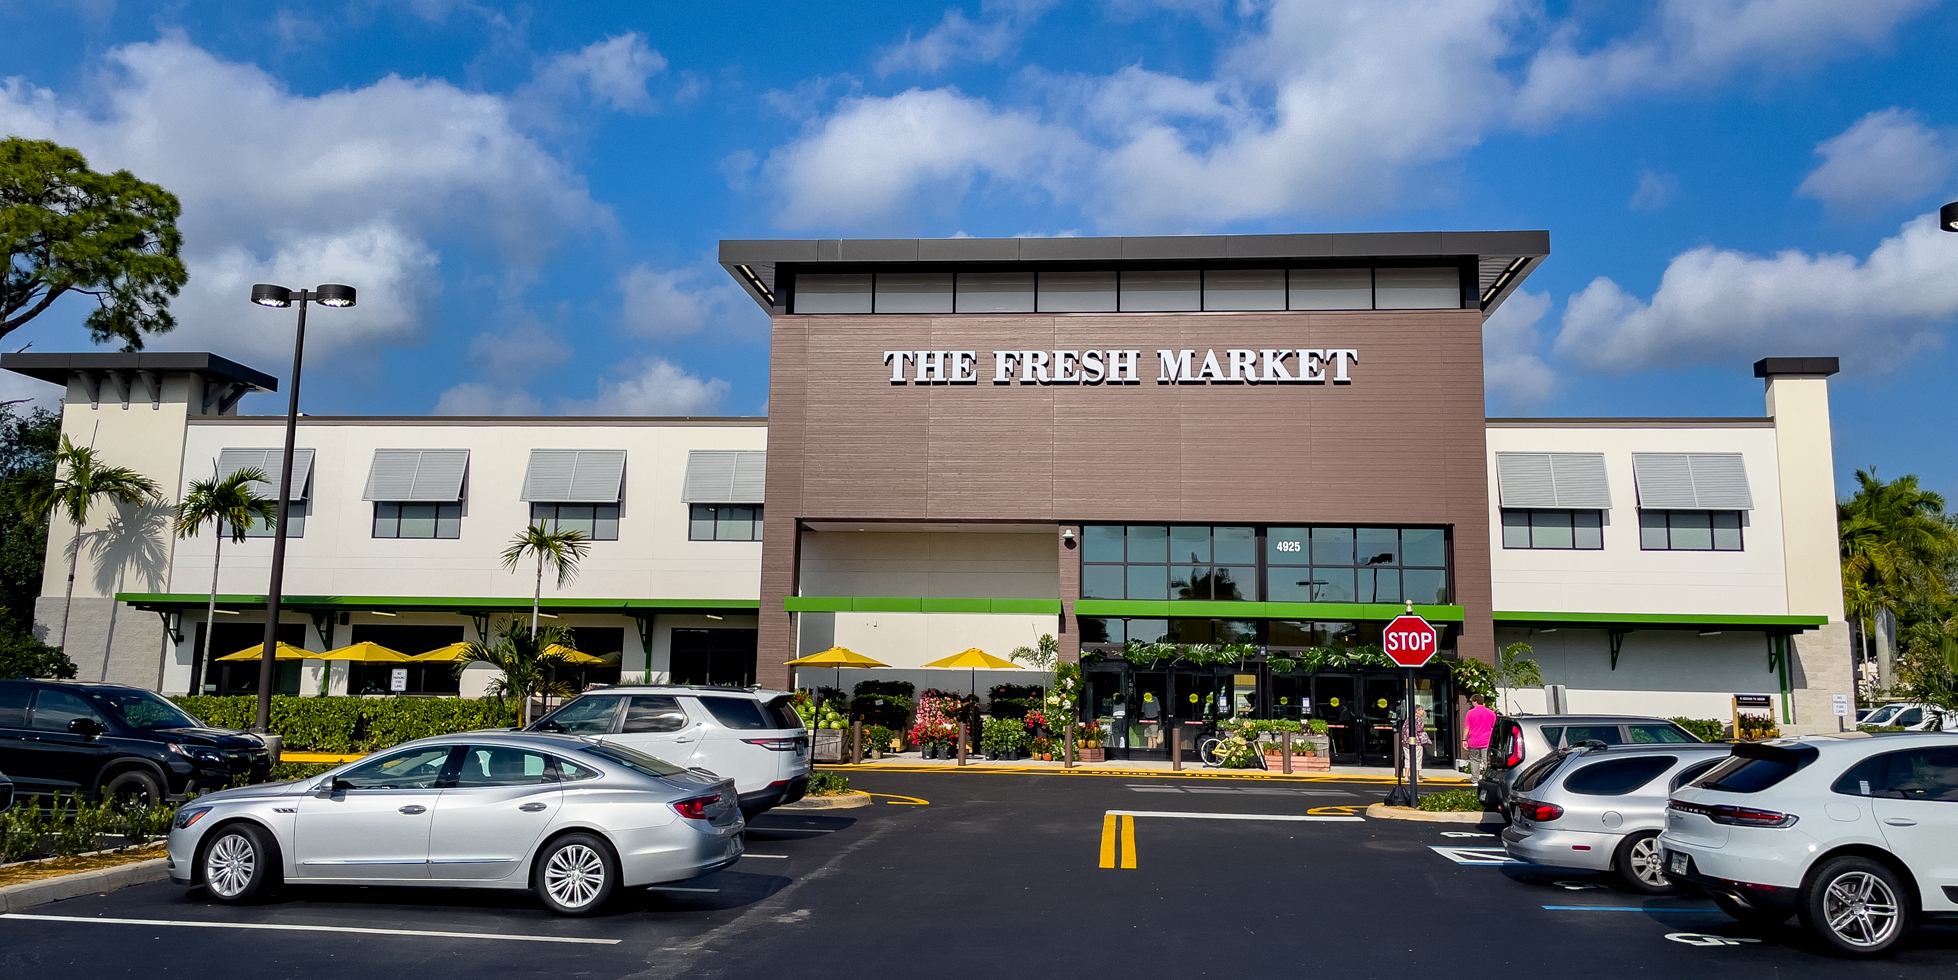 Chilean Retail Group Acquires Majority Stake In The Fresh Market